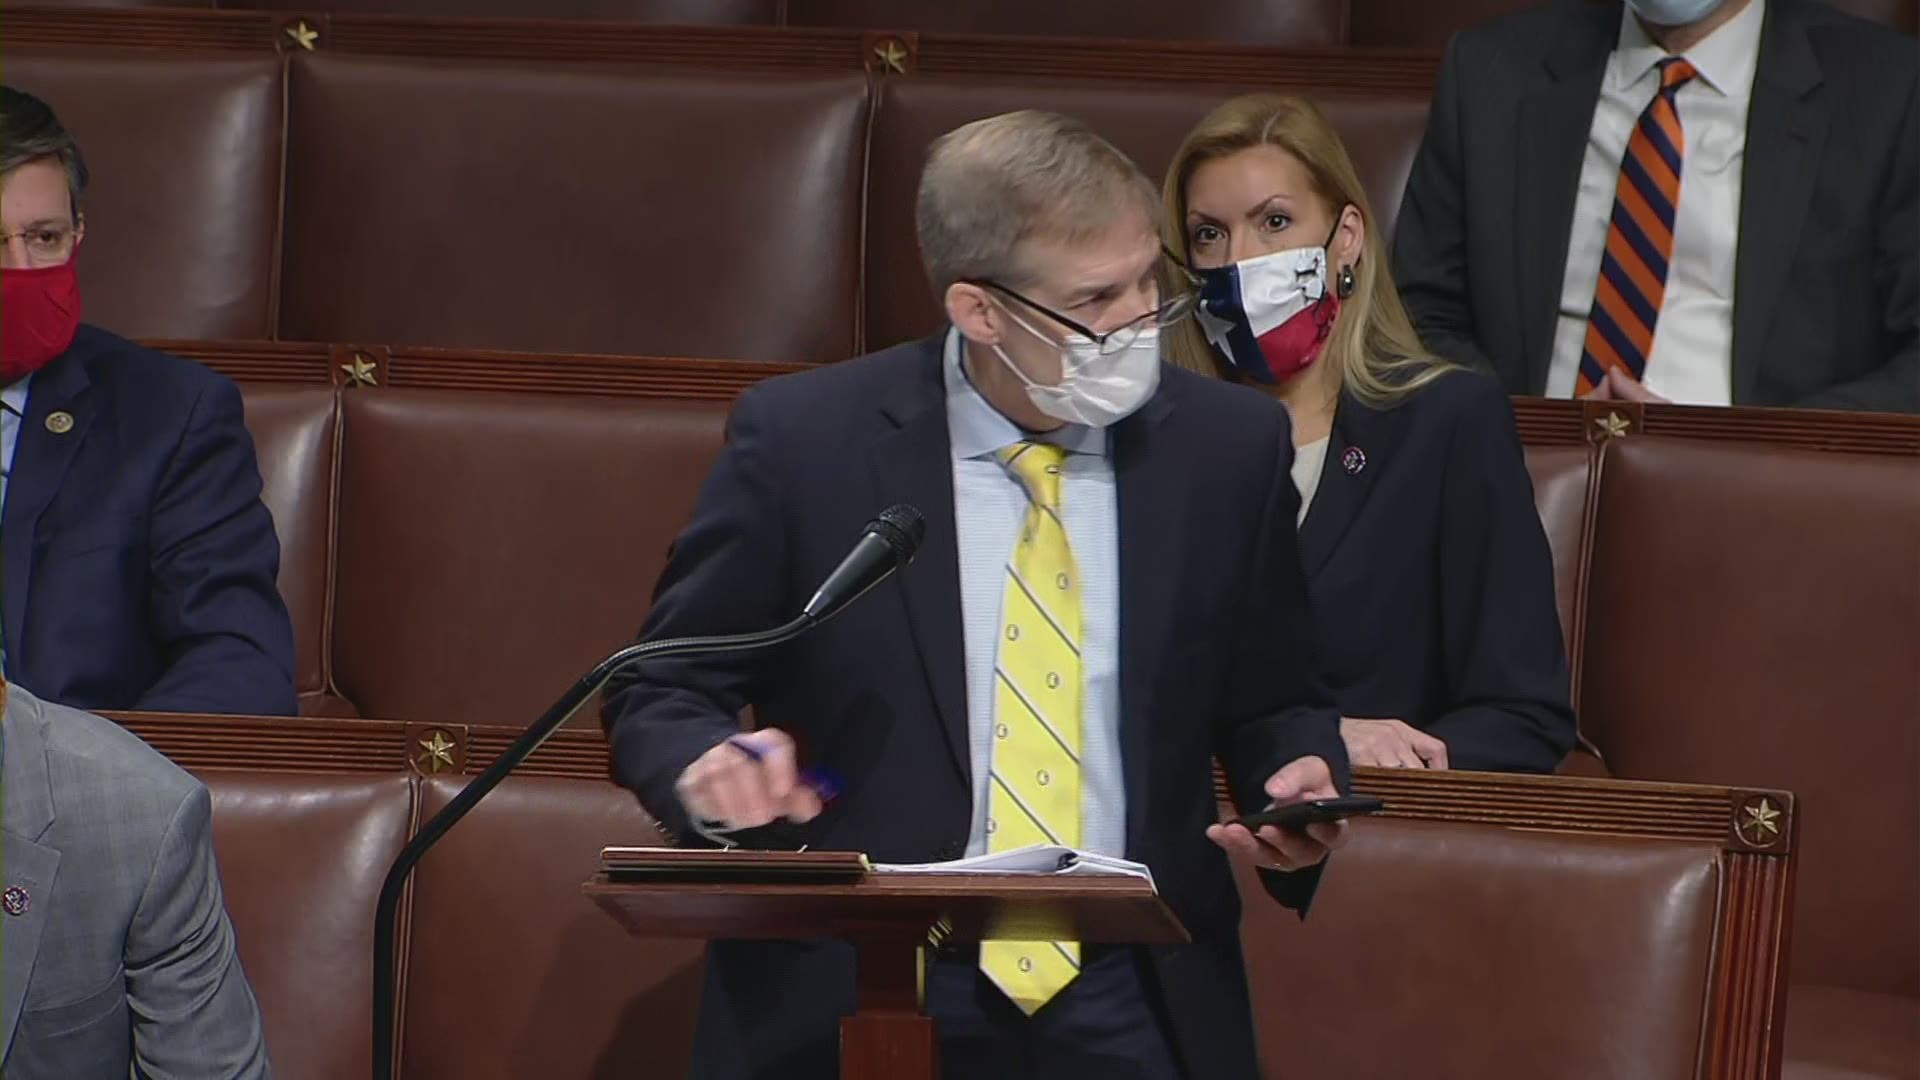 While the House debated whether to impeach President Trump a second time, Rep. Jim Jordan read a statement from Trump urging there be no more violence.